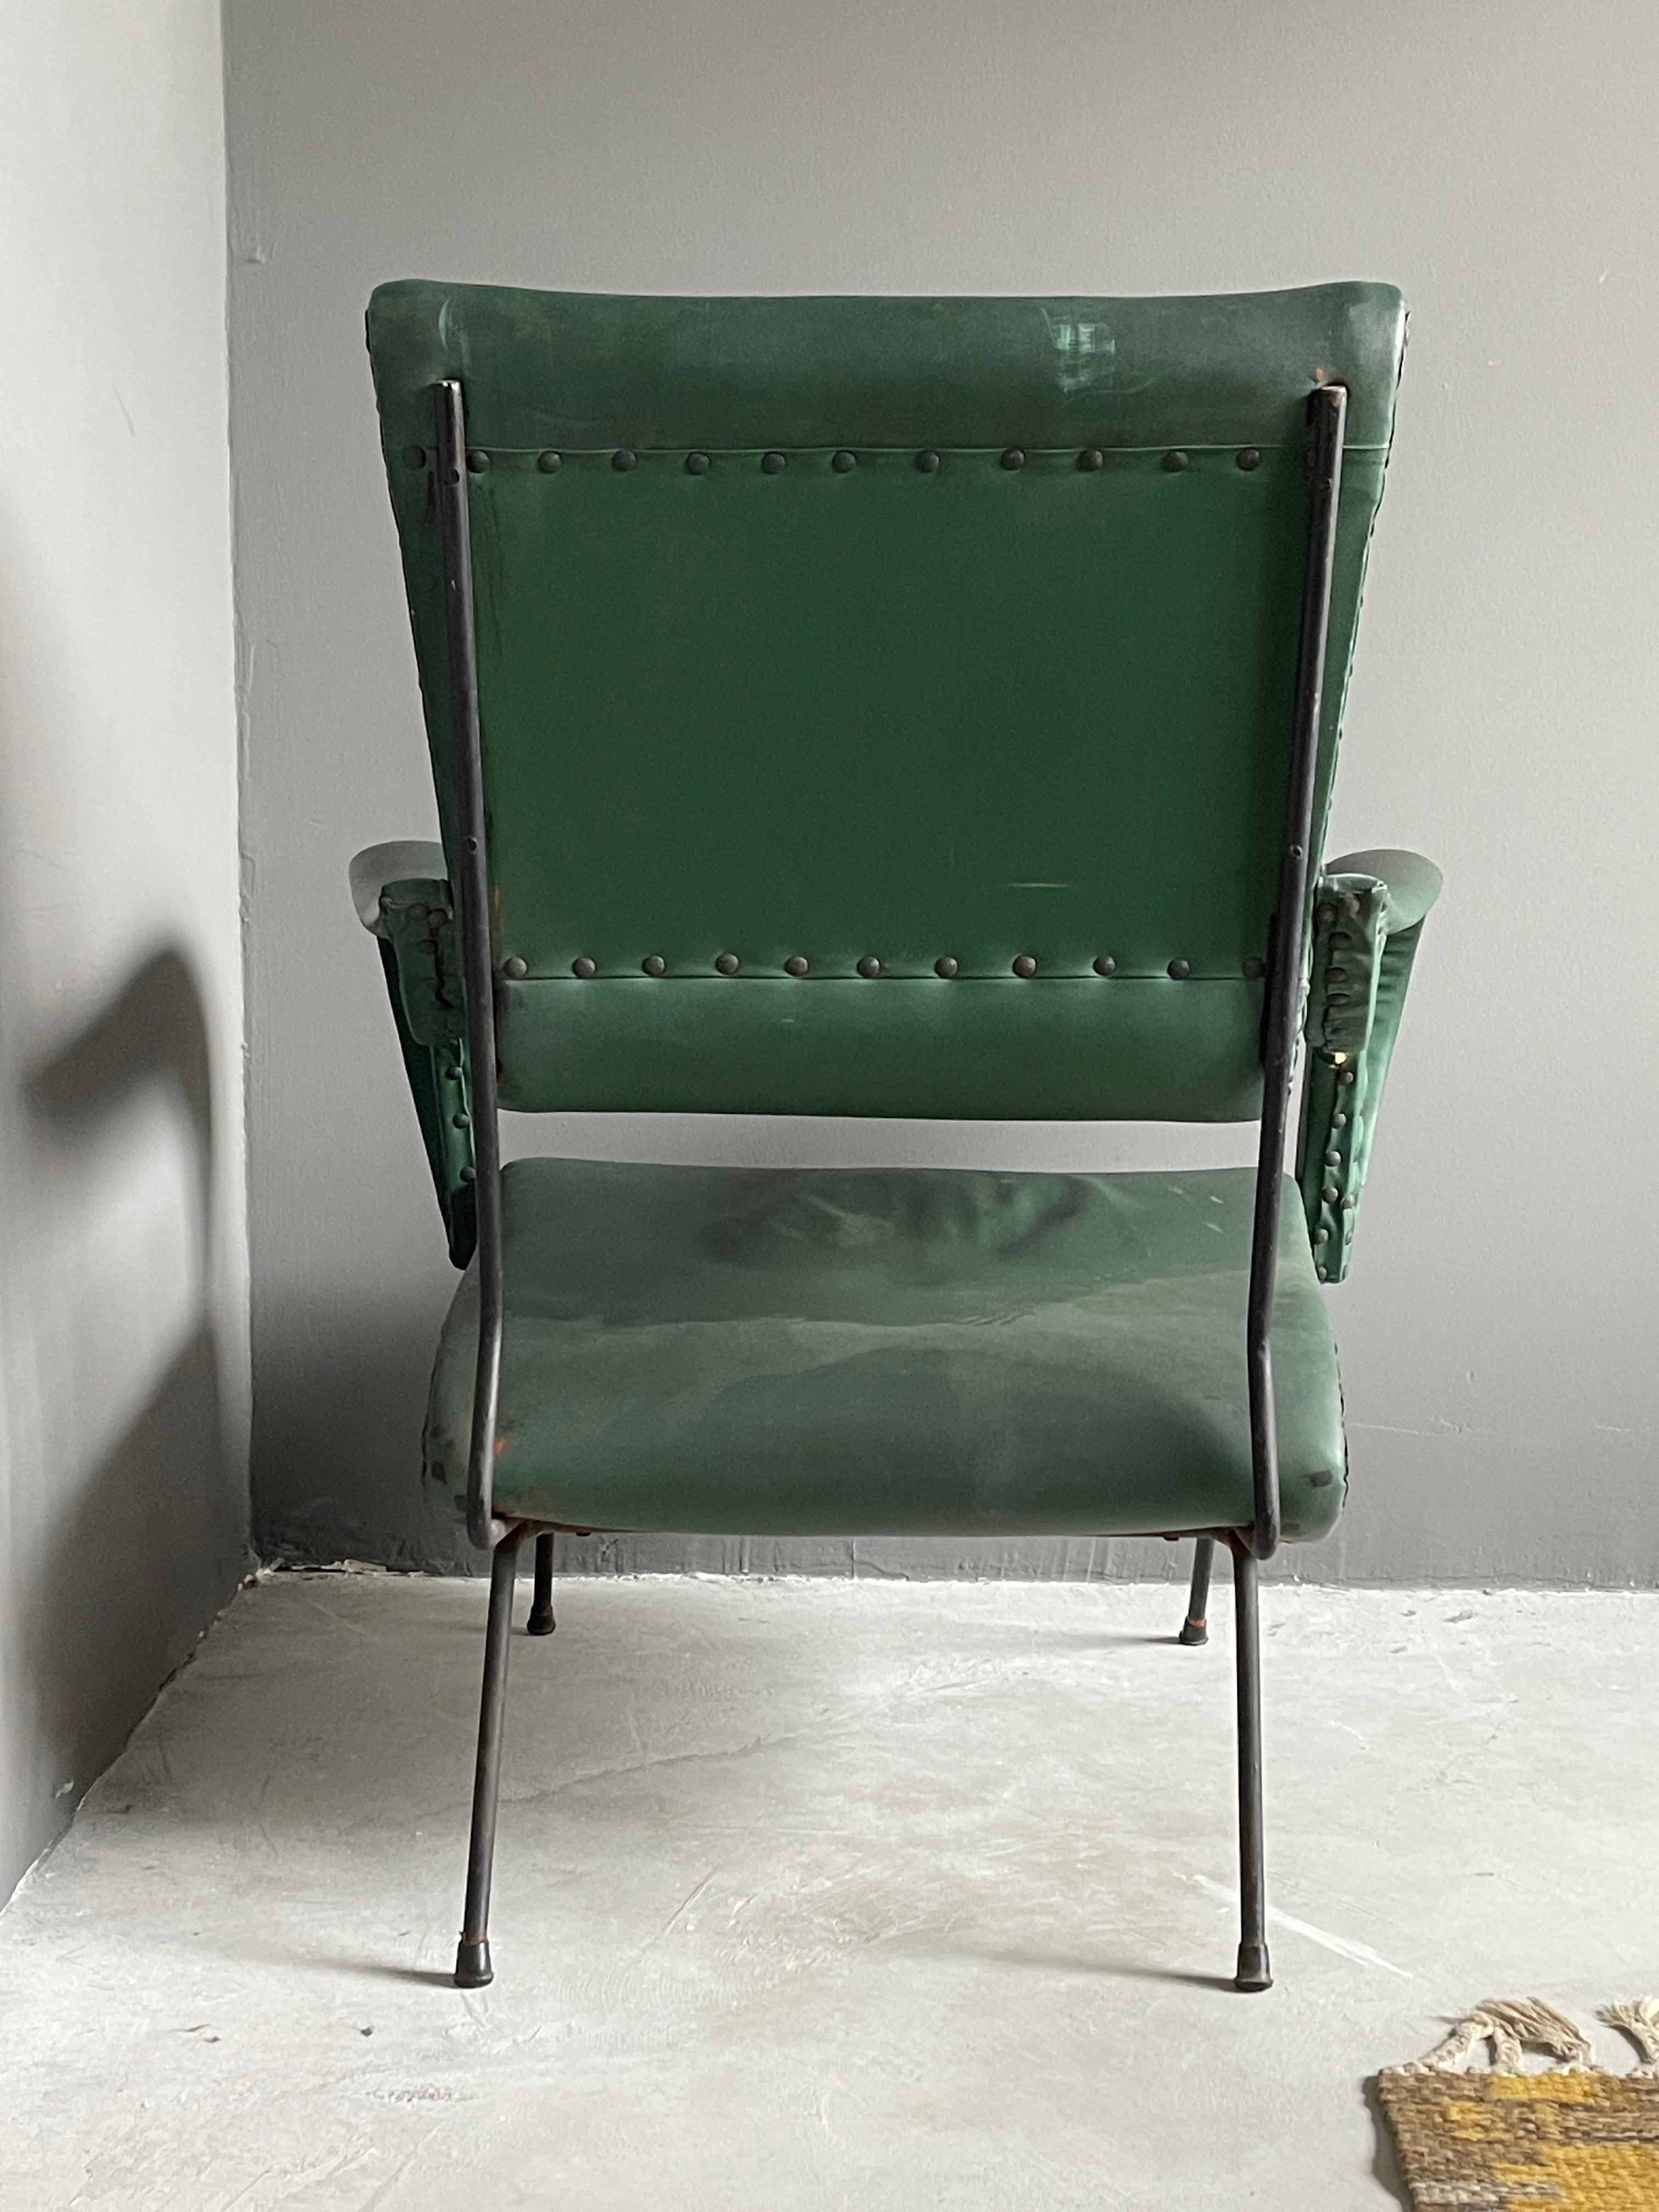 Italian Designer, Lounge Chairs, Lacquered Metal, Green-Dyed Vinyl, Italy, 1950s For Sale 3